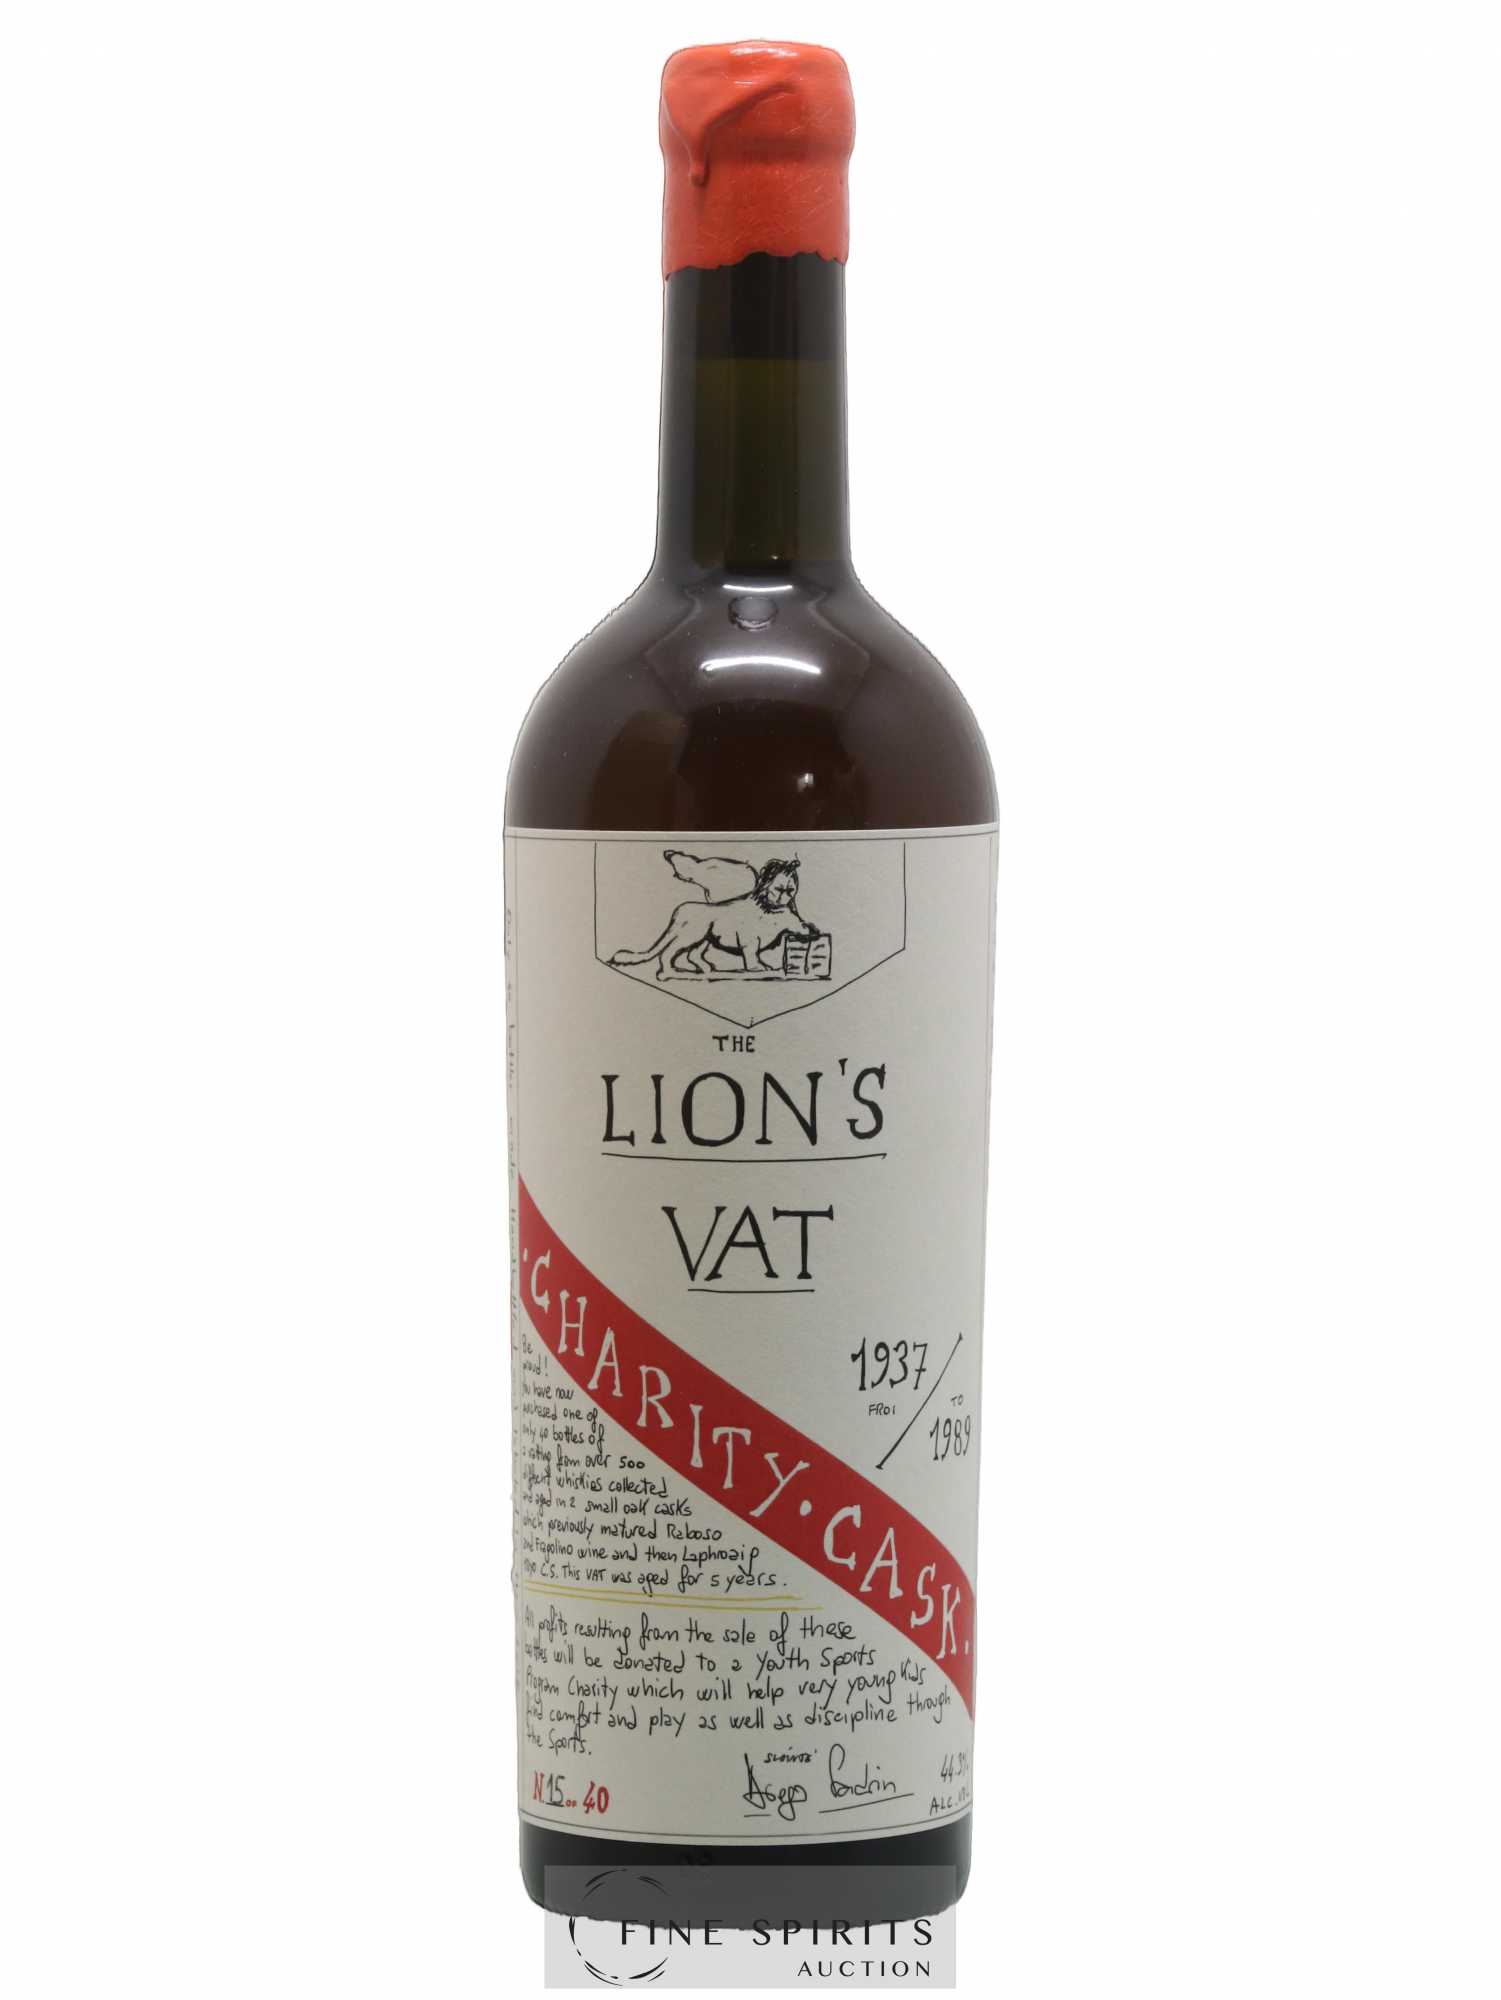 The Lion's Vat Of. Charity Cask One of 40 - bottled 2018 